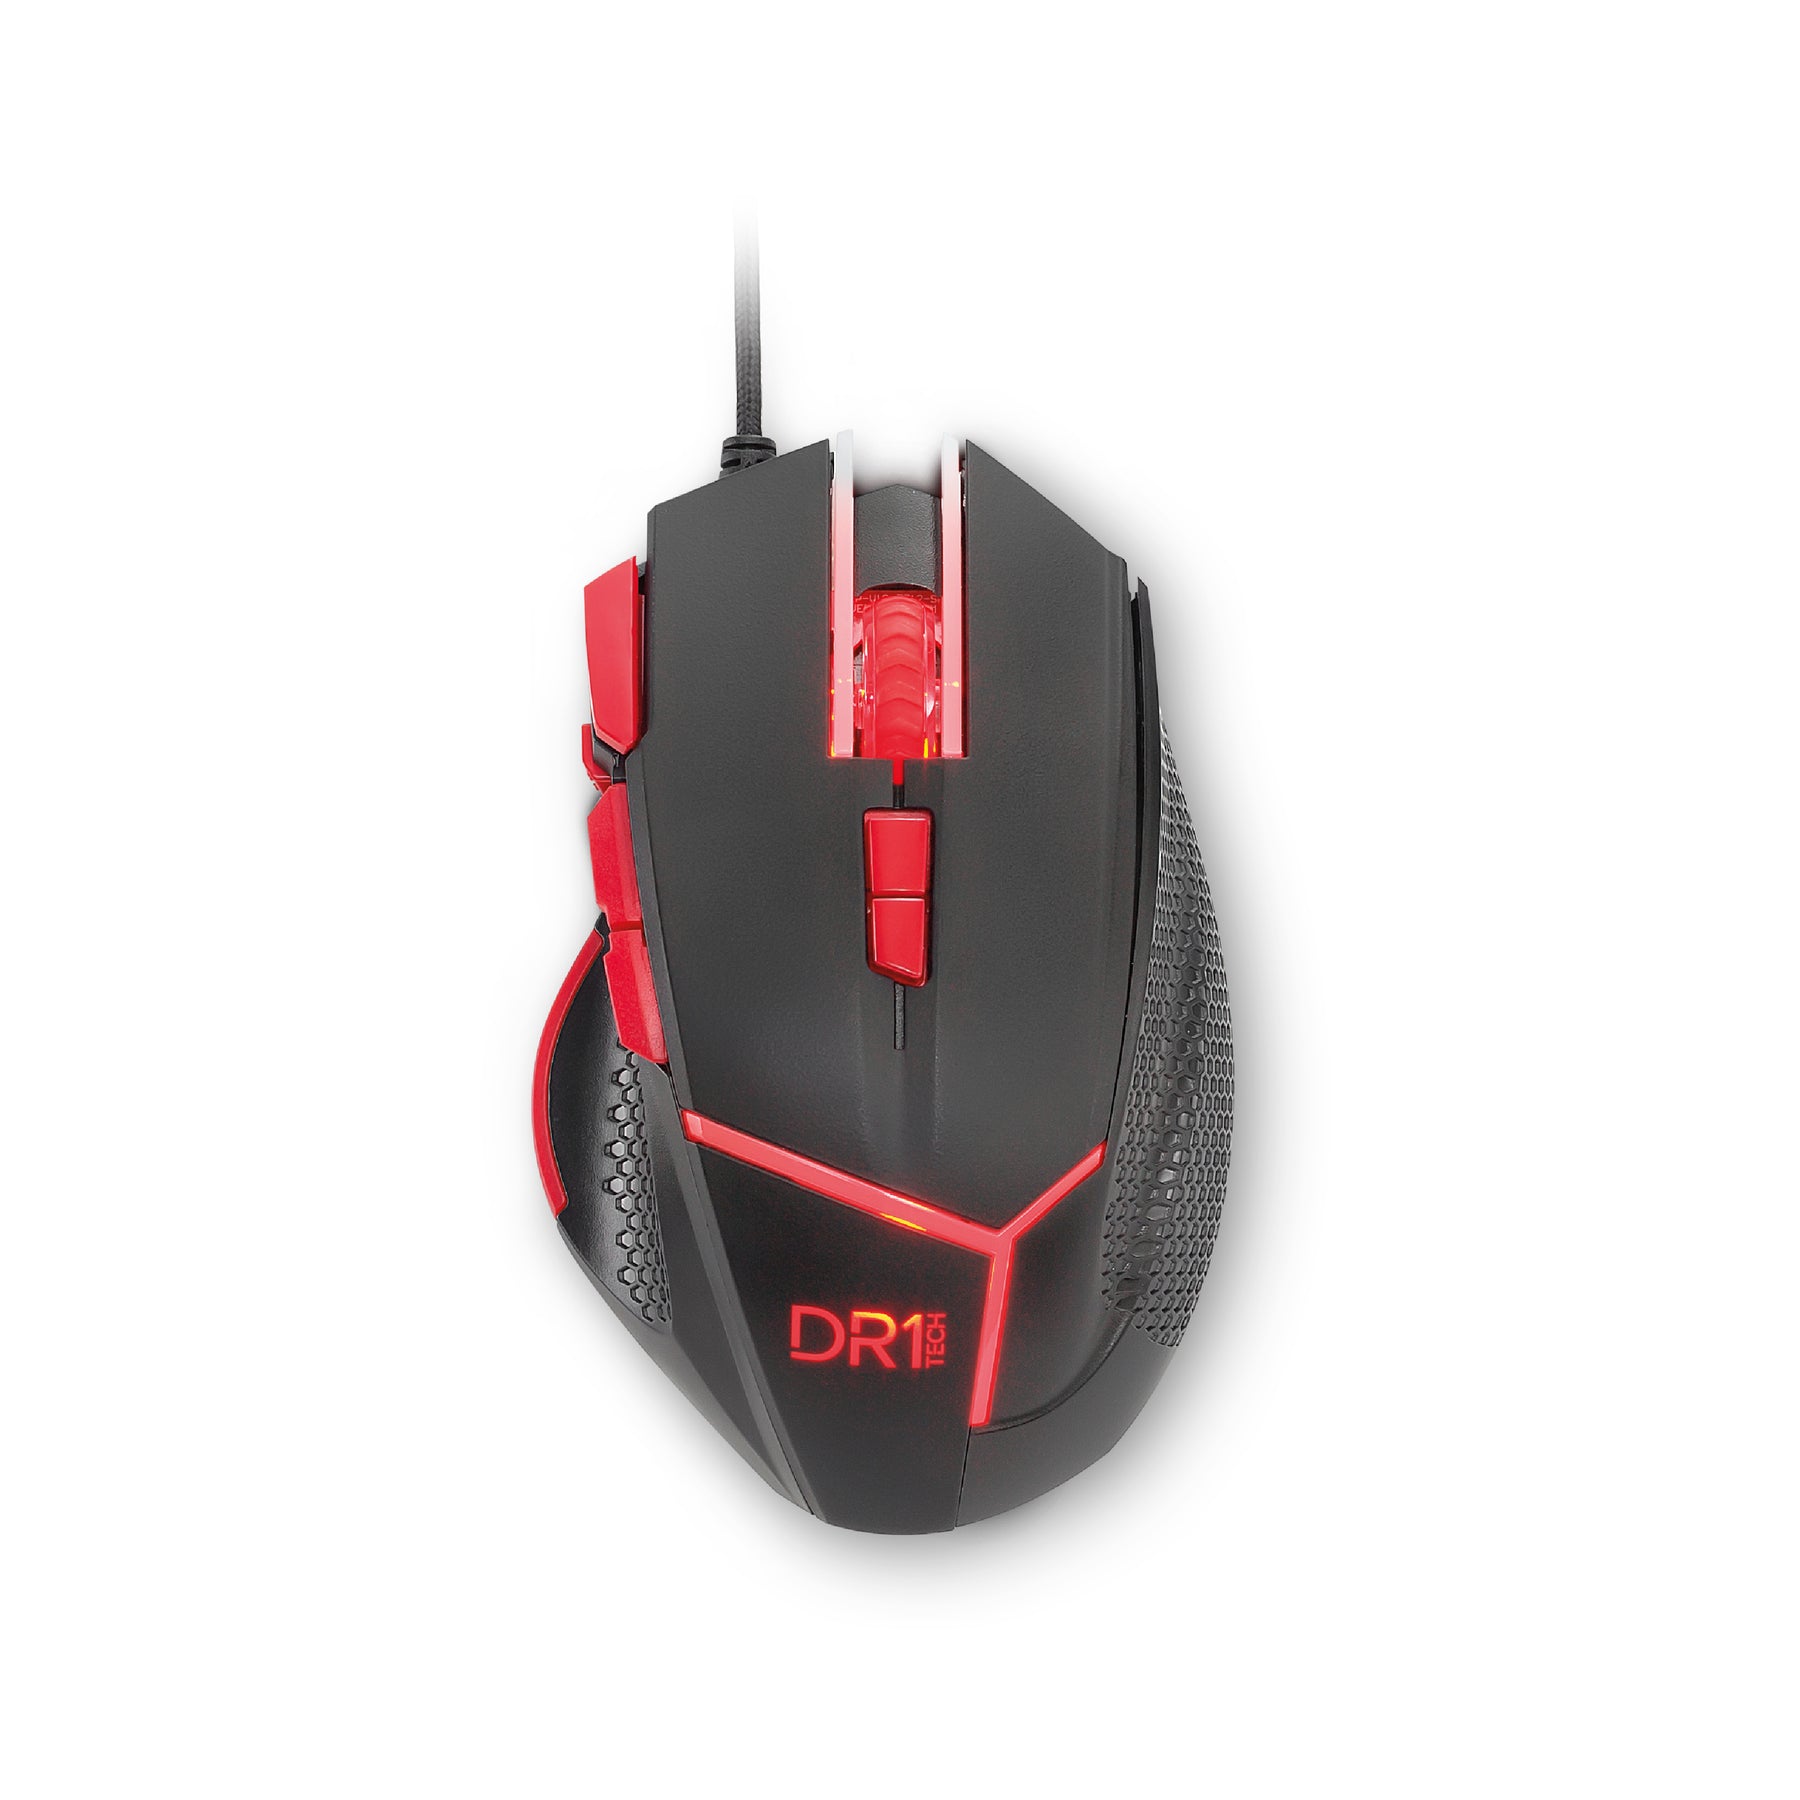 USB mouse for PC/PS4